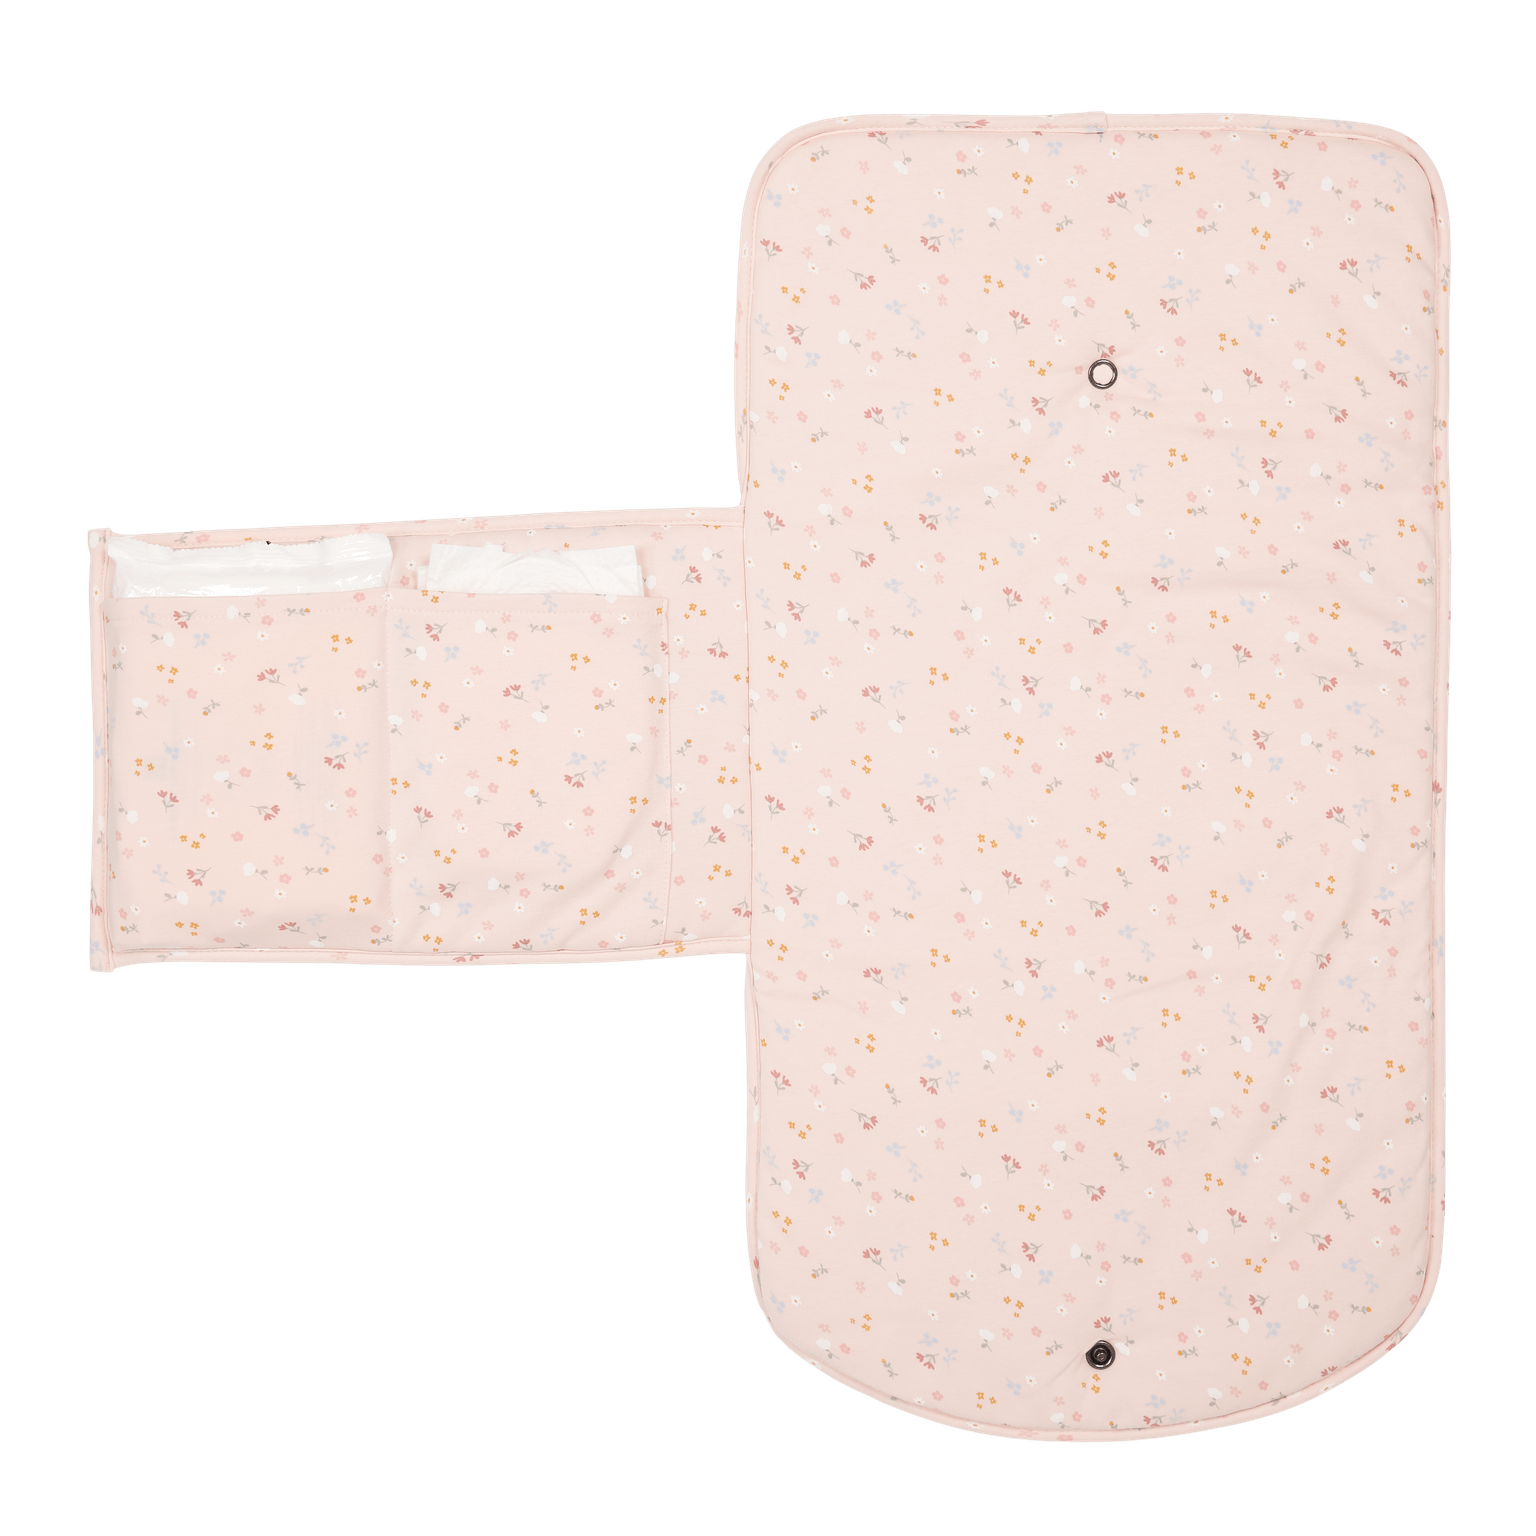 Little Dutch Changing Mat Little Dutch Changing Pad (Little Pink Flowers)